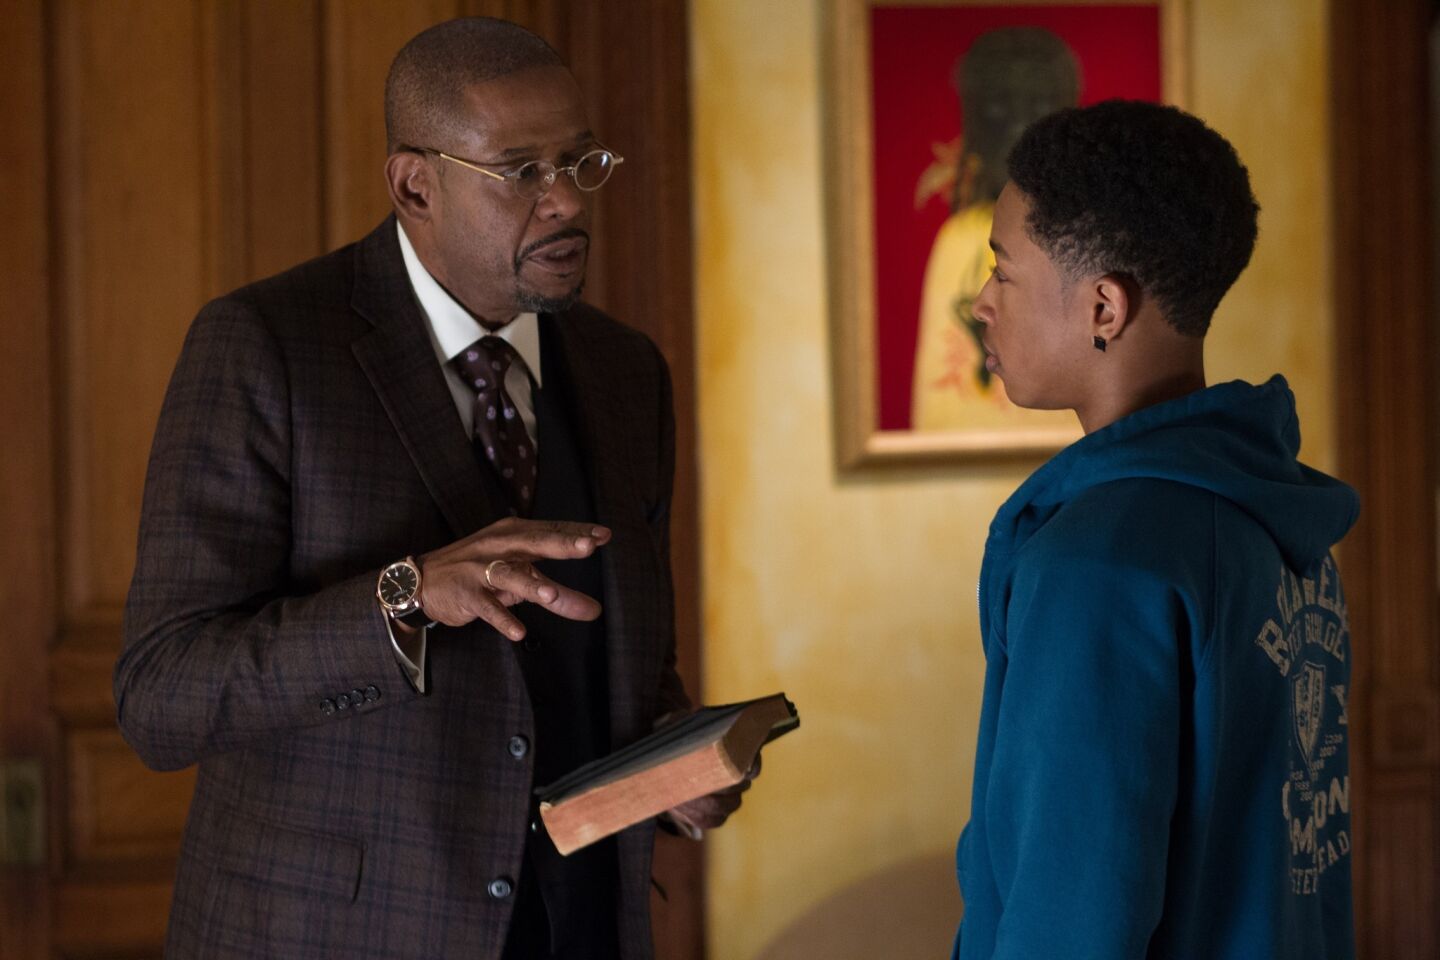 Forest Whitaker plays the wise Rev. Cornell Cobbs in the musical drama "Black Nativity." He becomes an inspiration for Langston (Jacob Latimore), right, a street-smart teen raised by a single mother who embarks on a surprising journey.